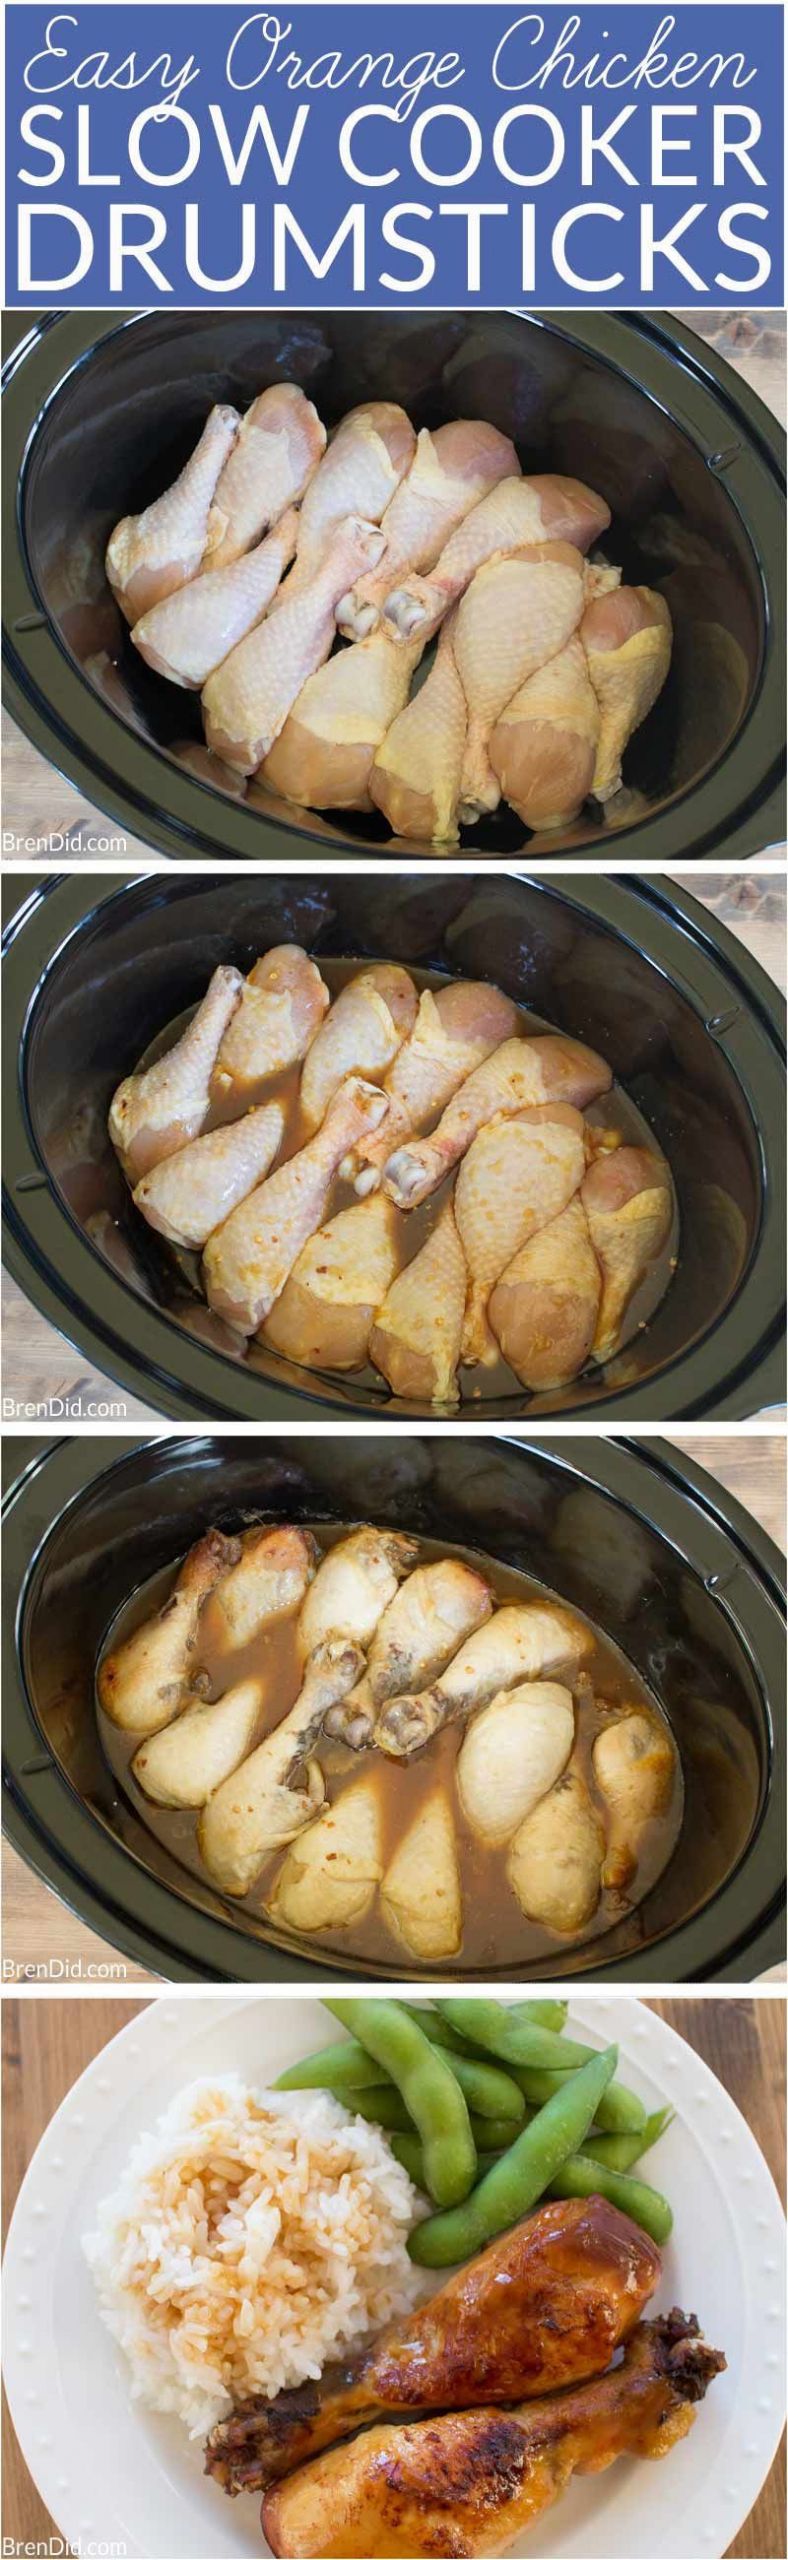 Healthy Chicken Drumstick Slow Cooker Recipes
 Top 30 Healthy Chicken Drumstick Slow Cooker Recipes